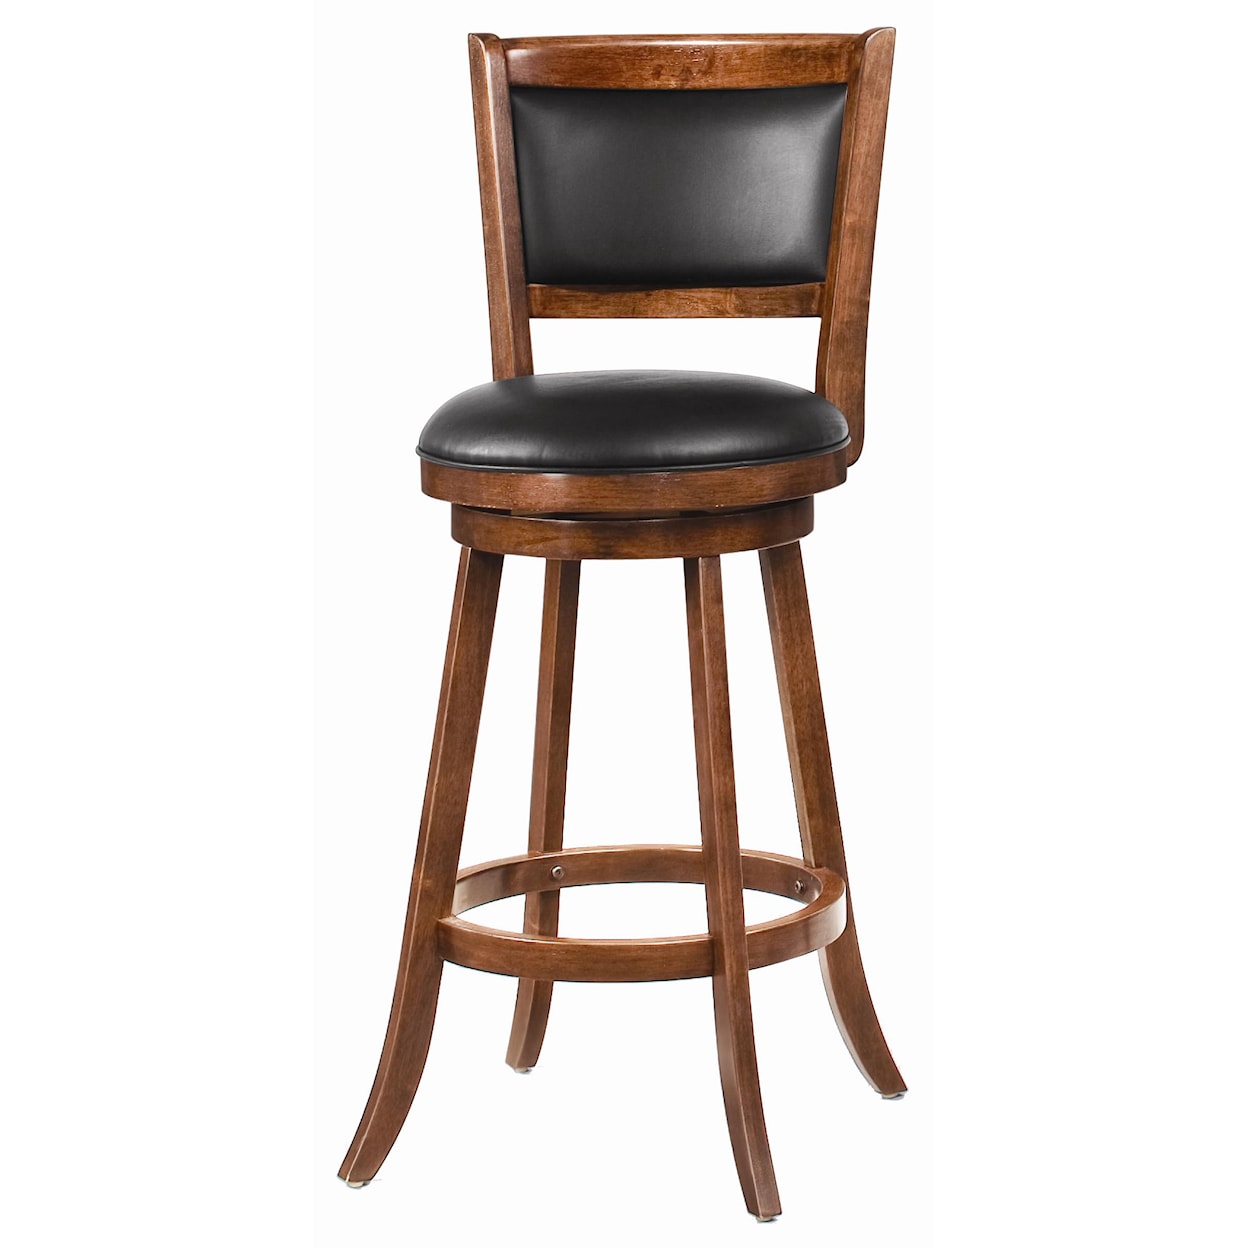 Coaster Furniture Dining Chairs and Bar Stools 29" Swivel Bar Stool with Upholstered Seat